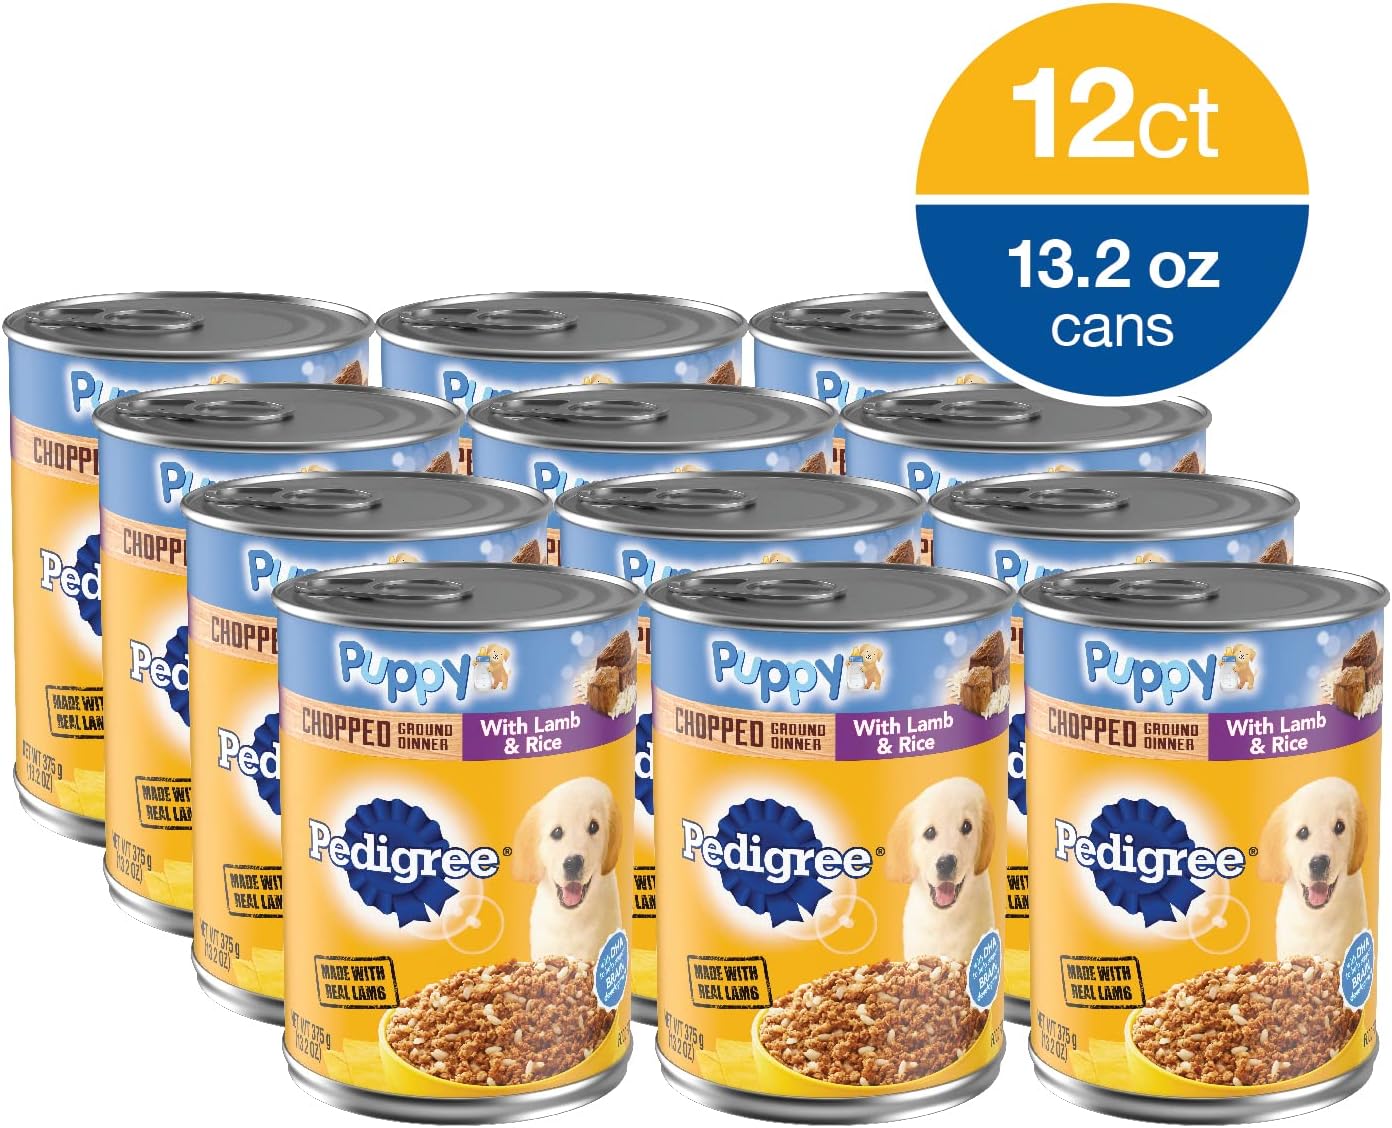 Wholesale prices with free shipping all over United States PEDIGREE CHOPPED GROUND DINNER Puppy Canned Soft Wet Dog Food With Chicken & Beef, 13.2 oz. Cans (Pack of 12) - Steven Deals